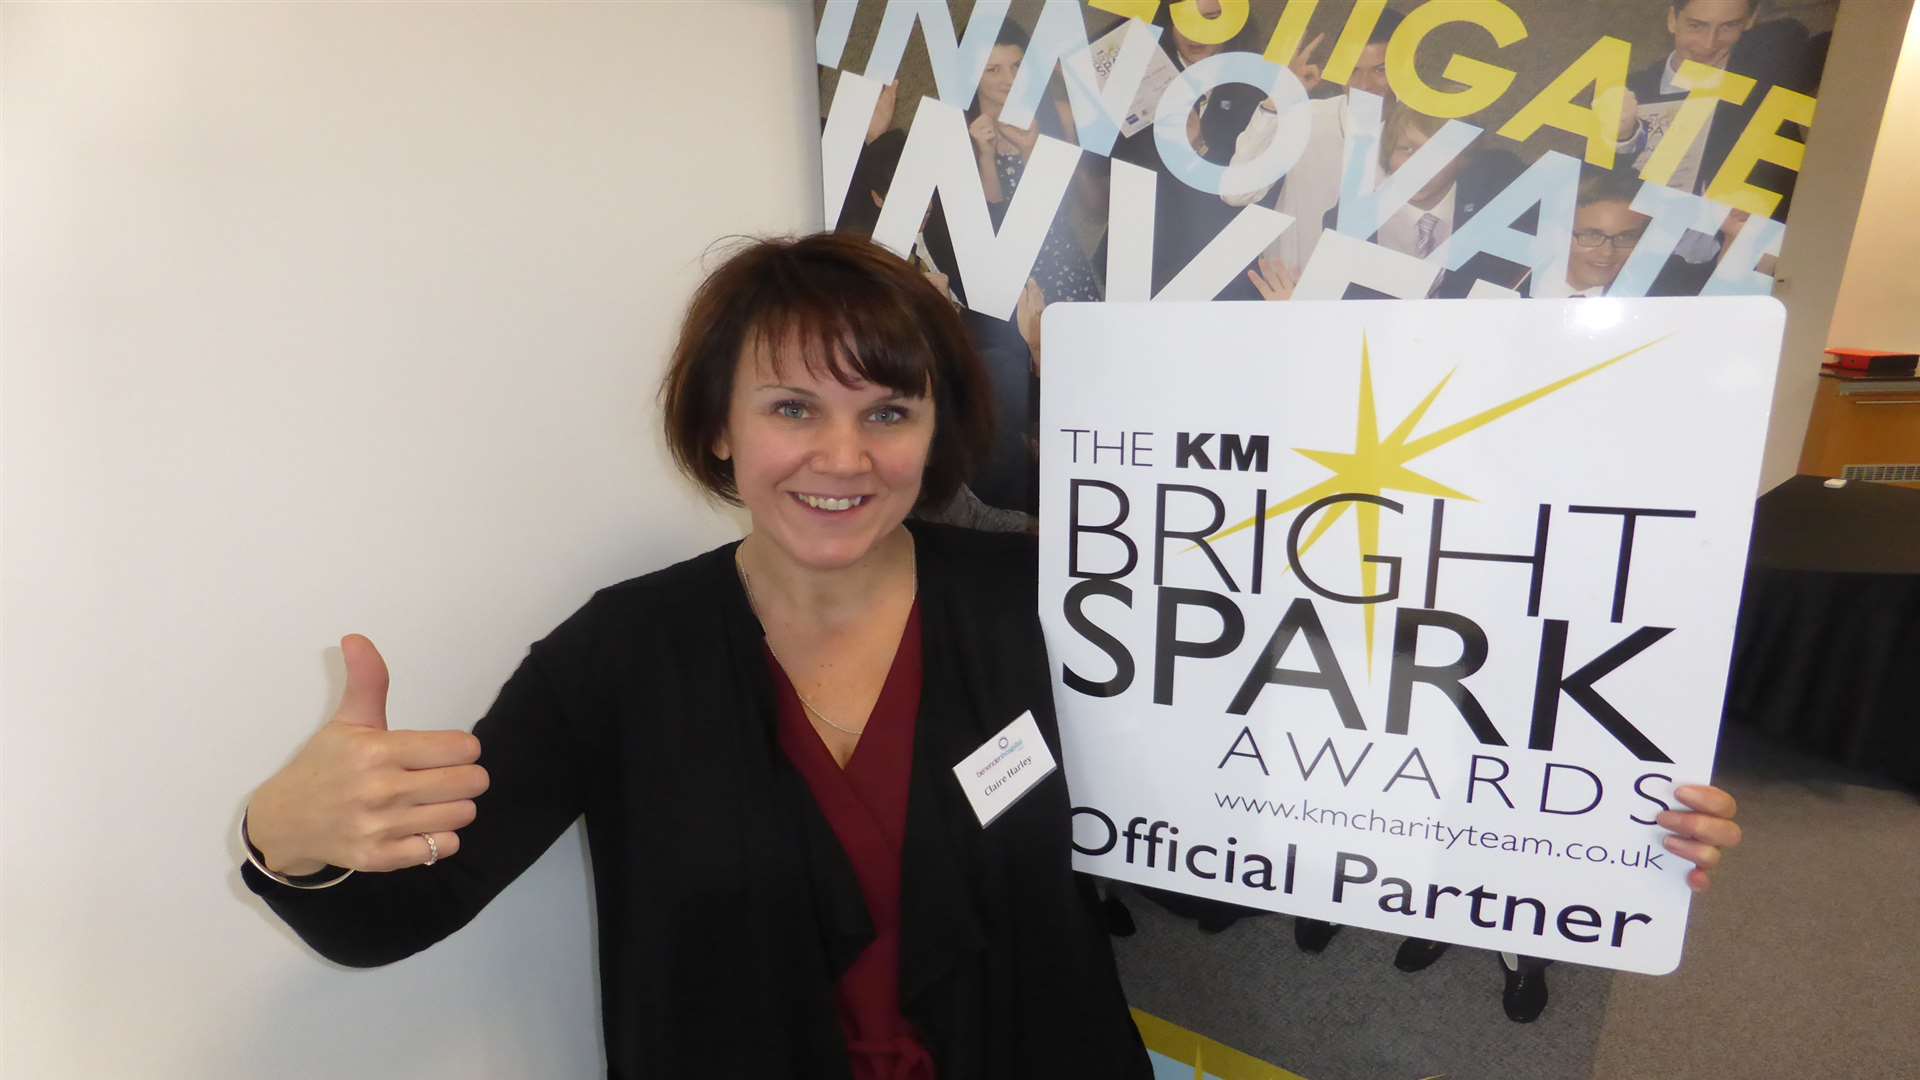 Claire Harley of Benenden Hospital Trust is proud to support The Bright Spark Awards 2017.